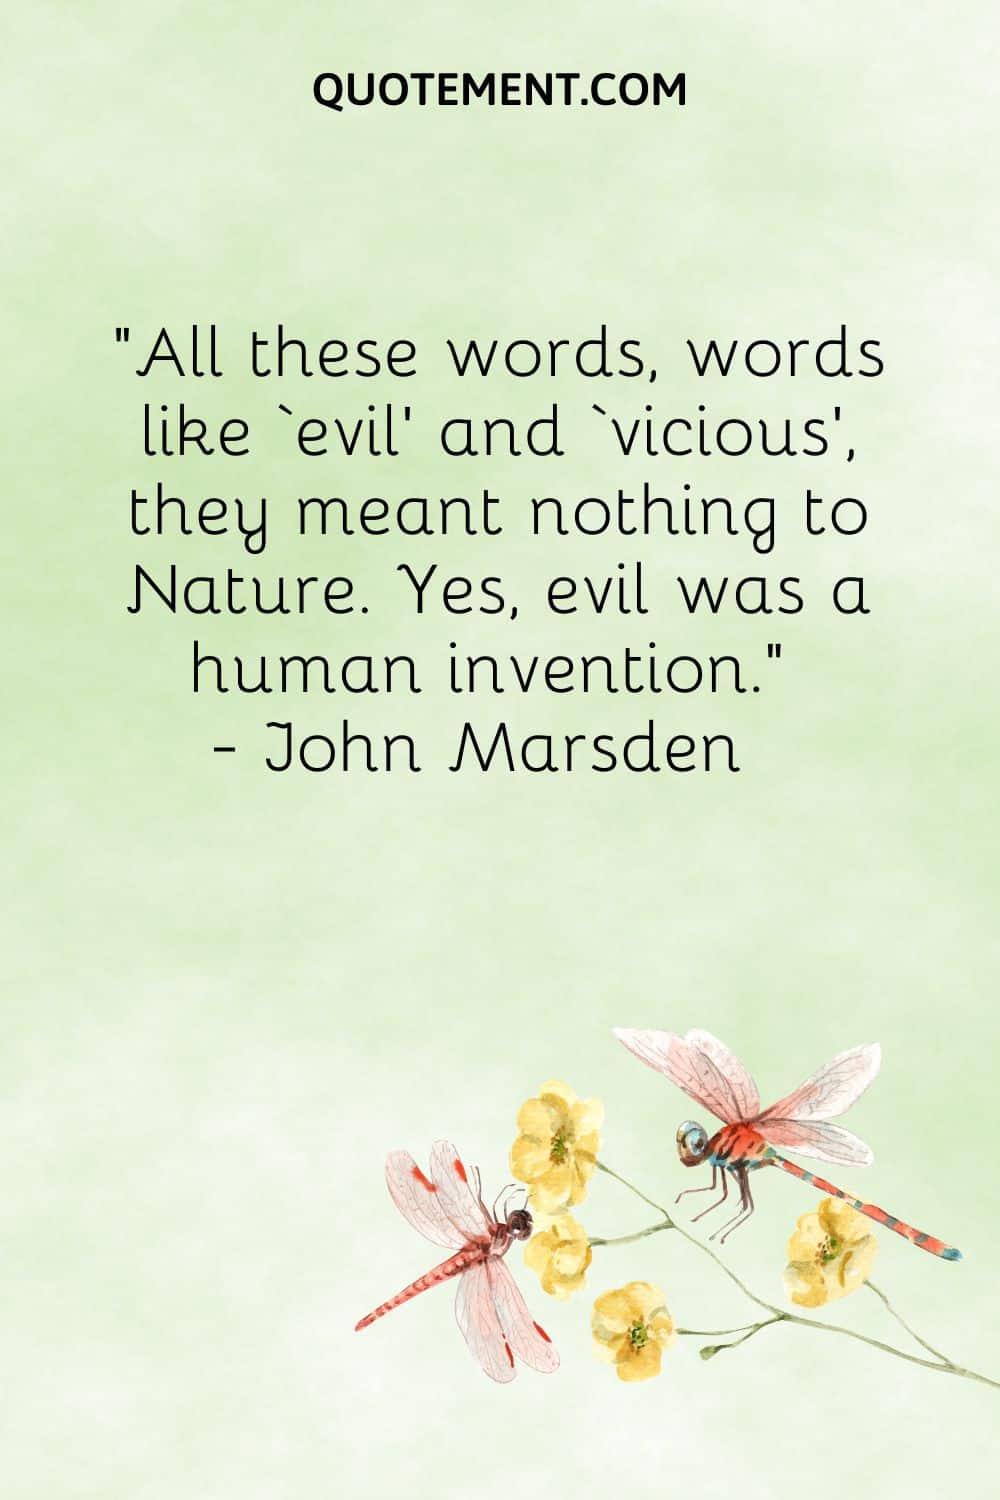 All these words, words like ‘evil’ and ‘vicious’, they meant nothing to Nature